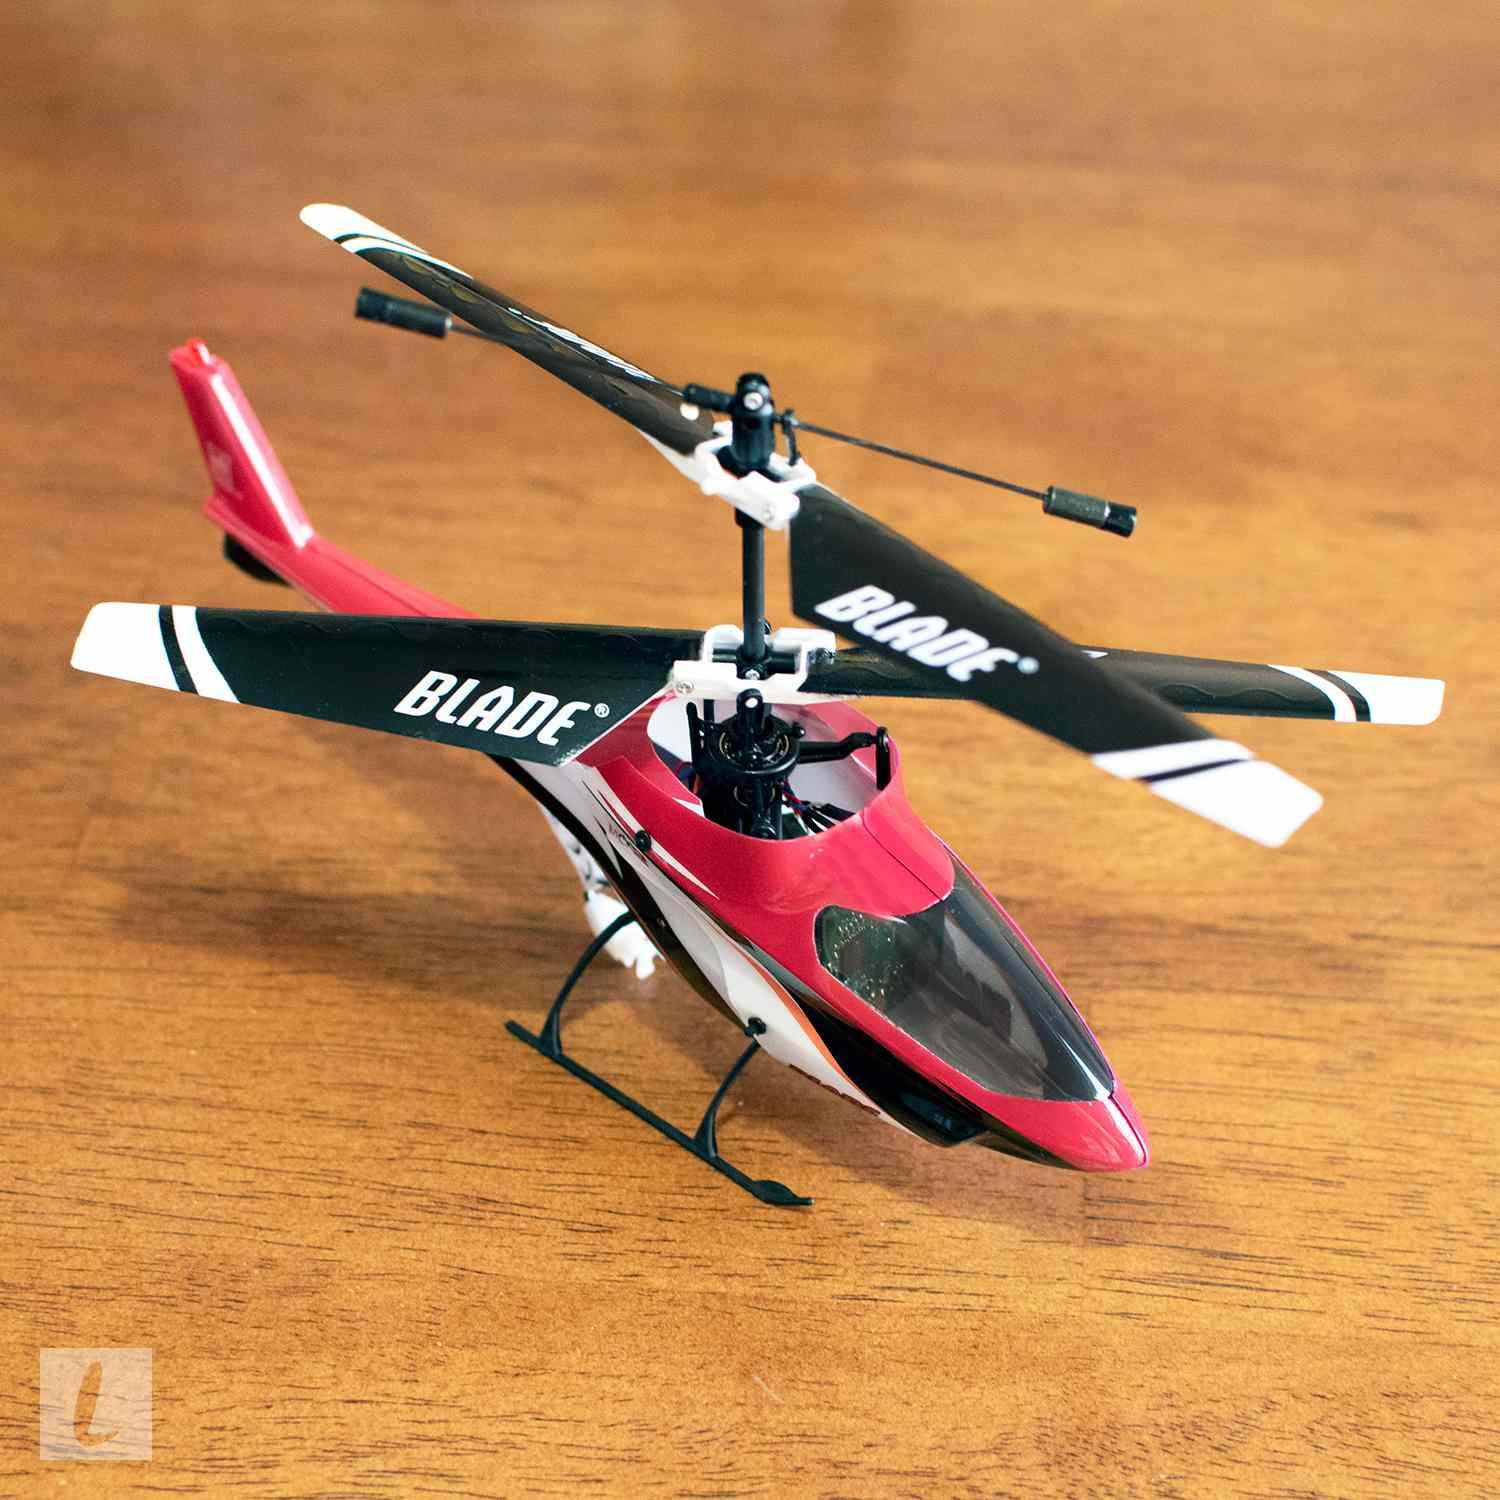 Tactical Rc Helicopter: Advanced Technology and Products in Tactical RC Helicopter Market